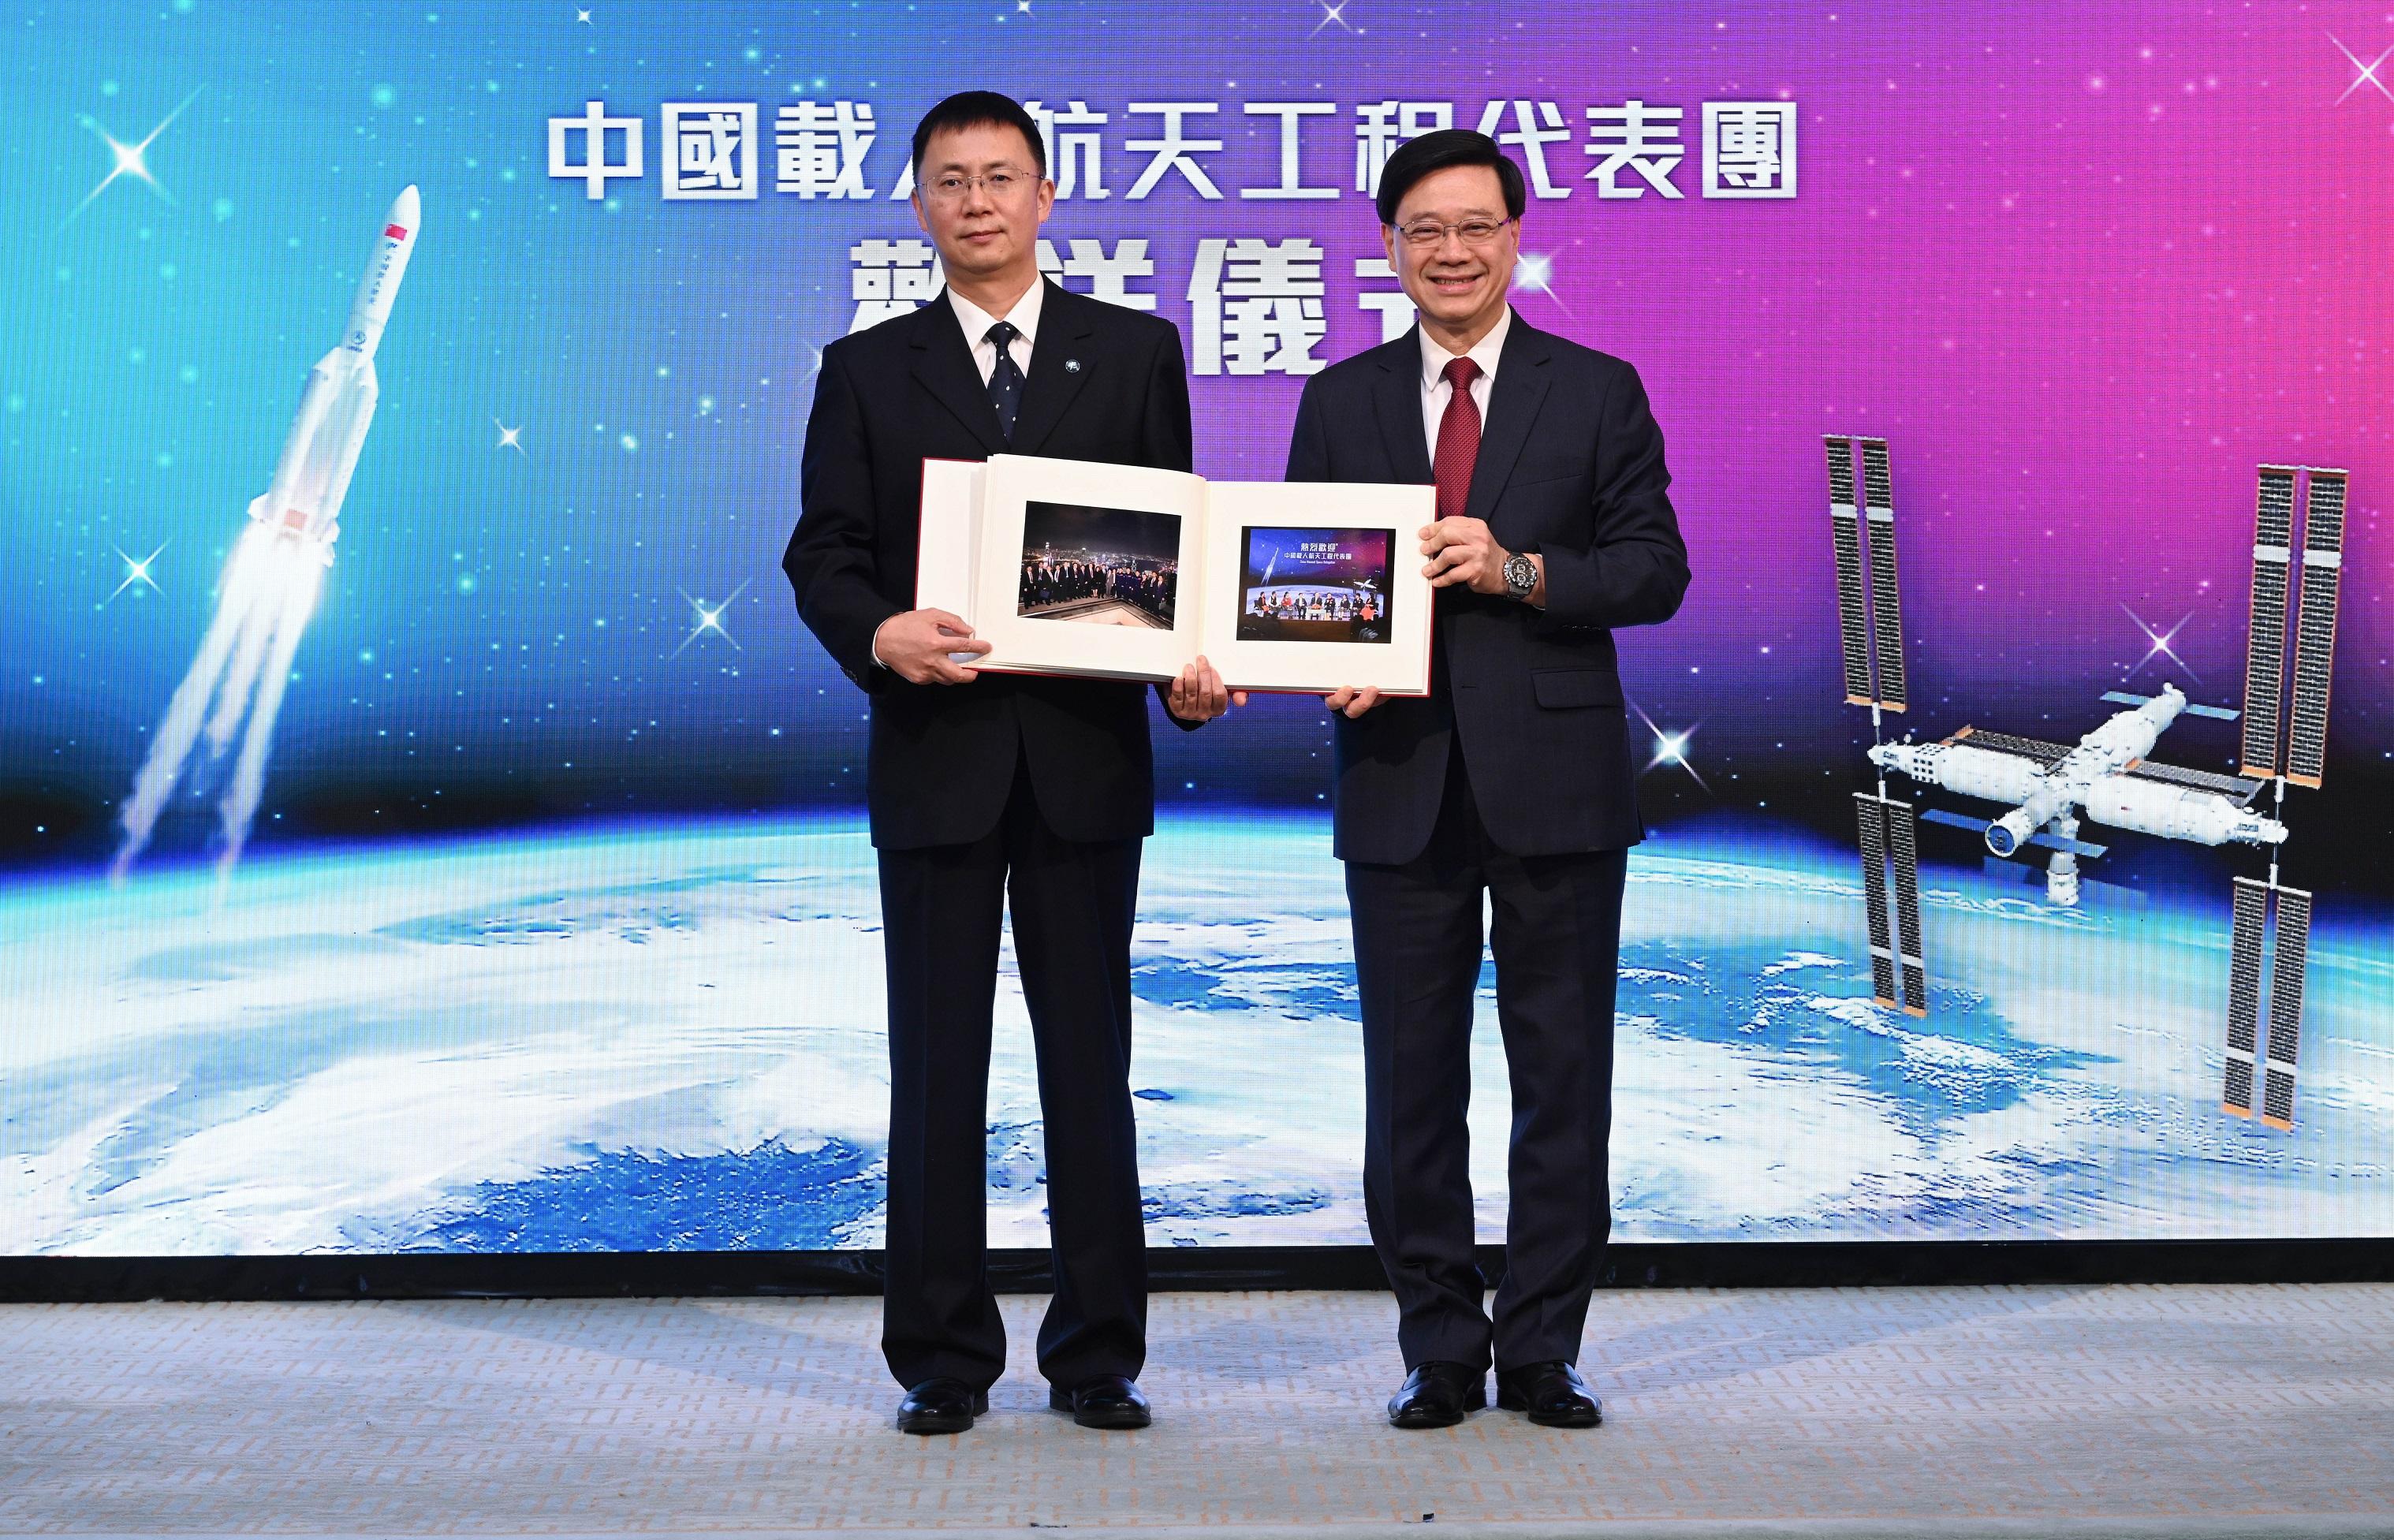 The China Manned Space delegation conducted their last day of visit to Hong Kong today (December 1). Photo shows the Chief Executive, Mr John Lee (right), presenting a souvenir to the leader of the delegation and Deputy Director General of the China Manned Space Agency, Mr Lin Xiqiang (left), at the farewell ceremony for the delegation.
